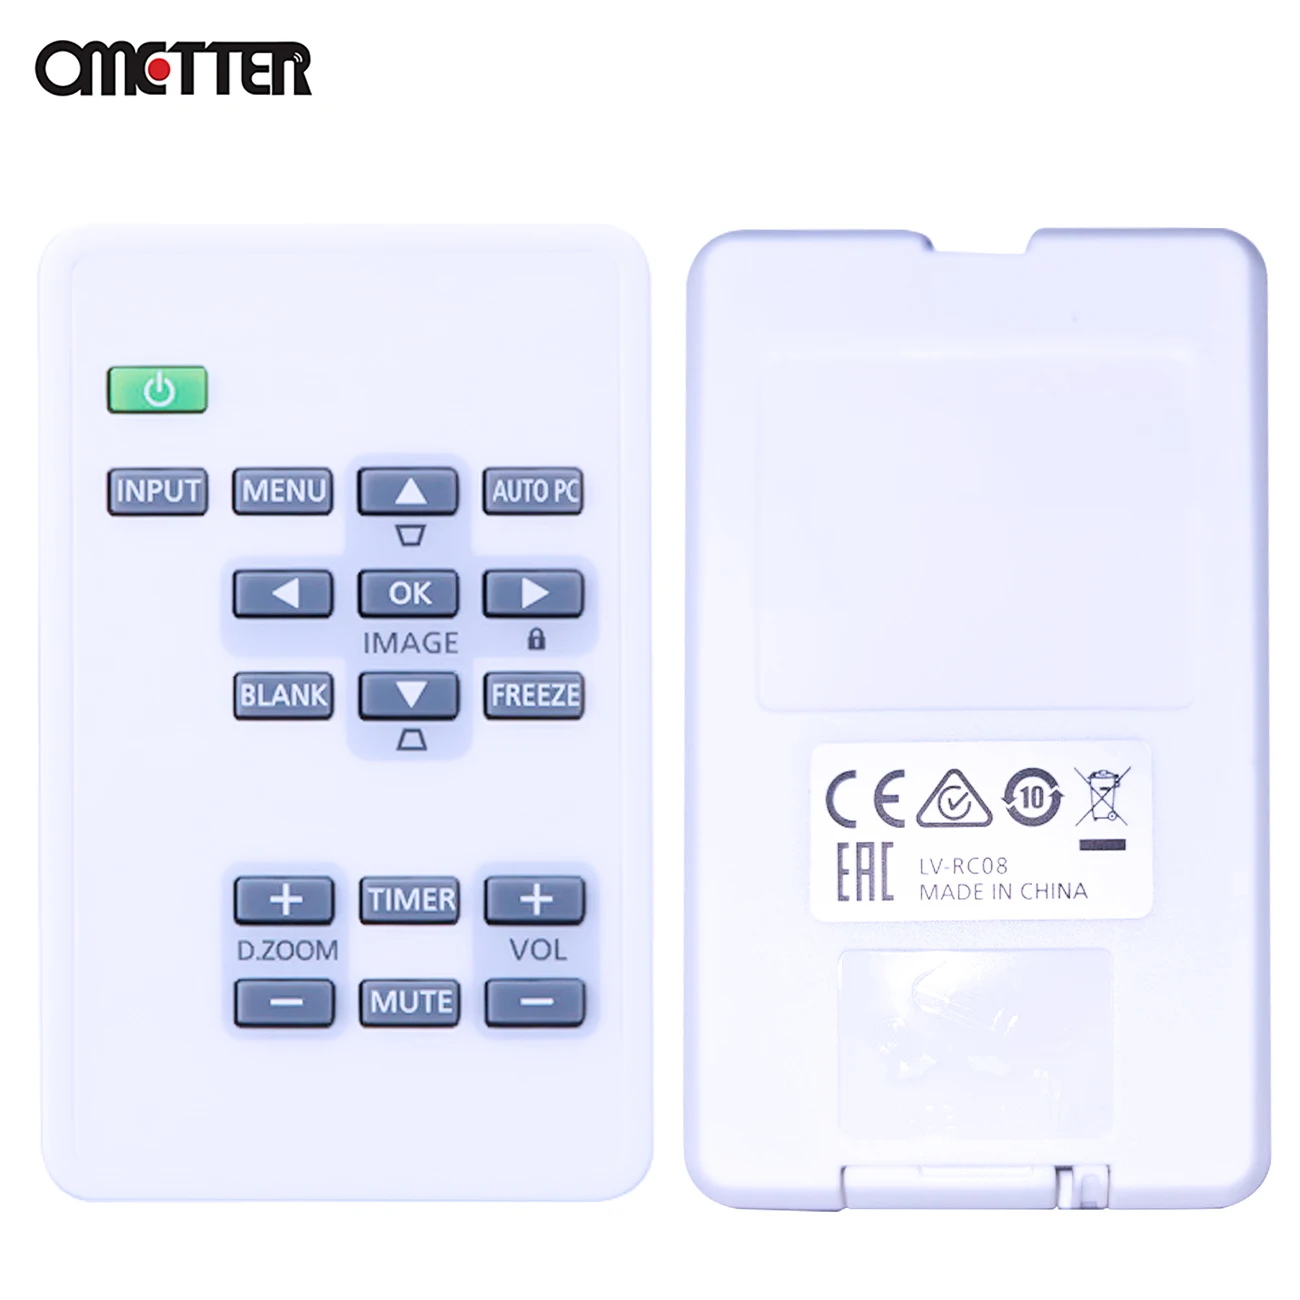 New Original Remote Control LV-RC08 for Canon LV-WX300 LV-X300 LV-S300 LX-MW500 LX-MU500 Projector images - 6